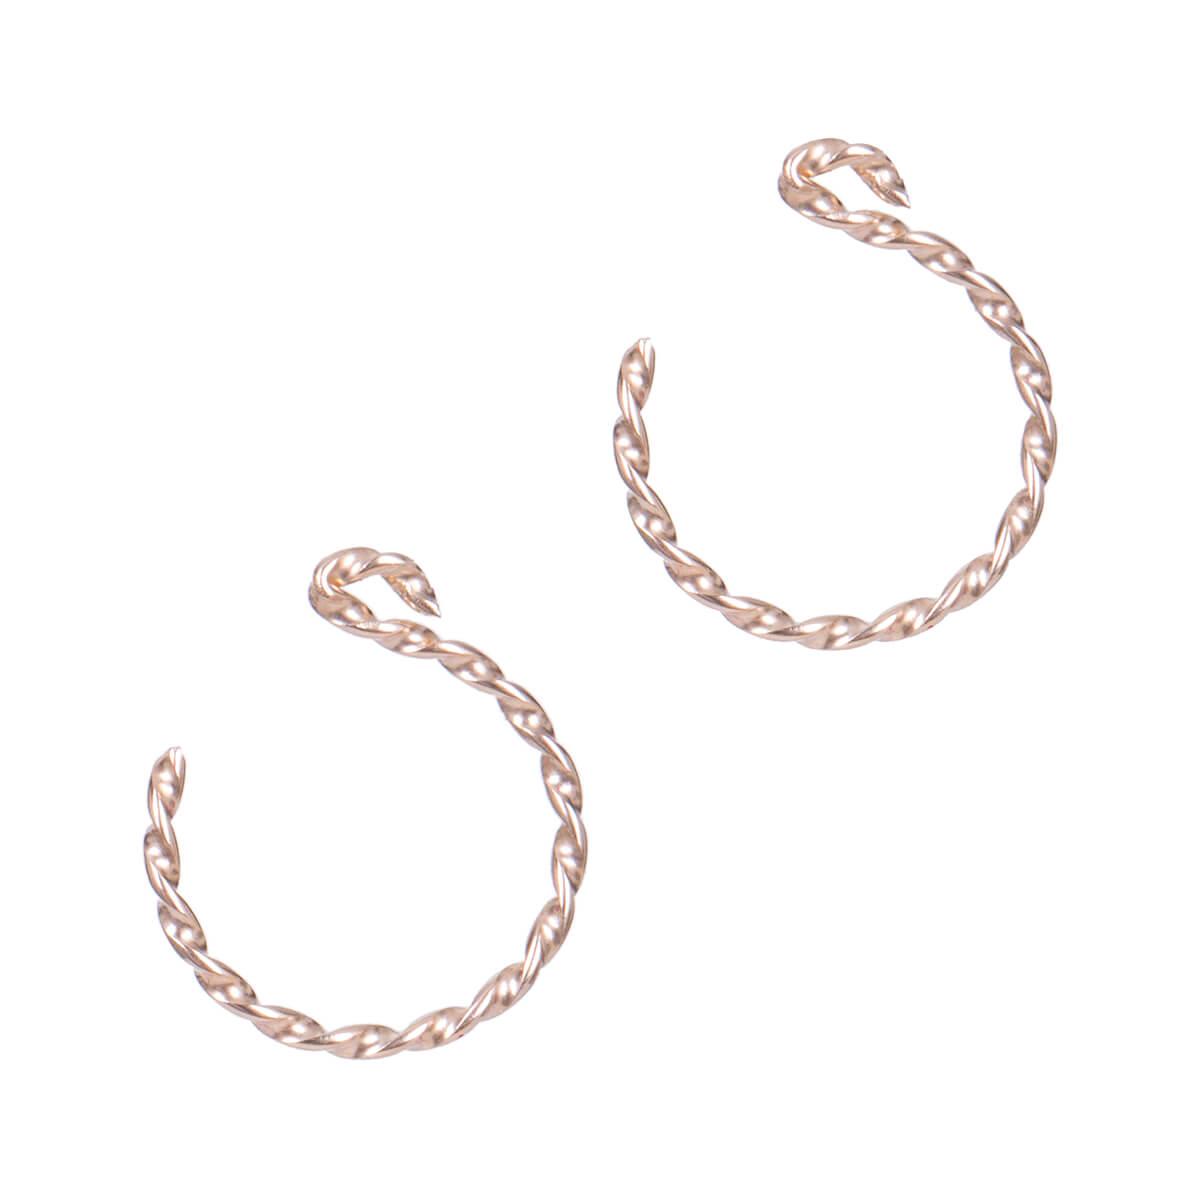 Louis Vuitton Blossom XL Hoops, Pink Gold and Diamonds. Size NSA